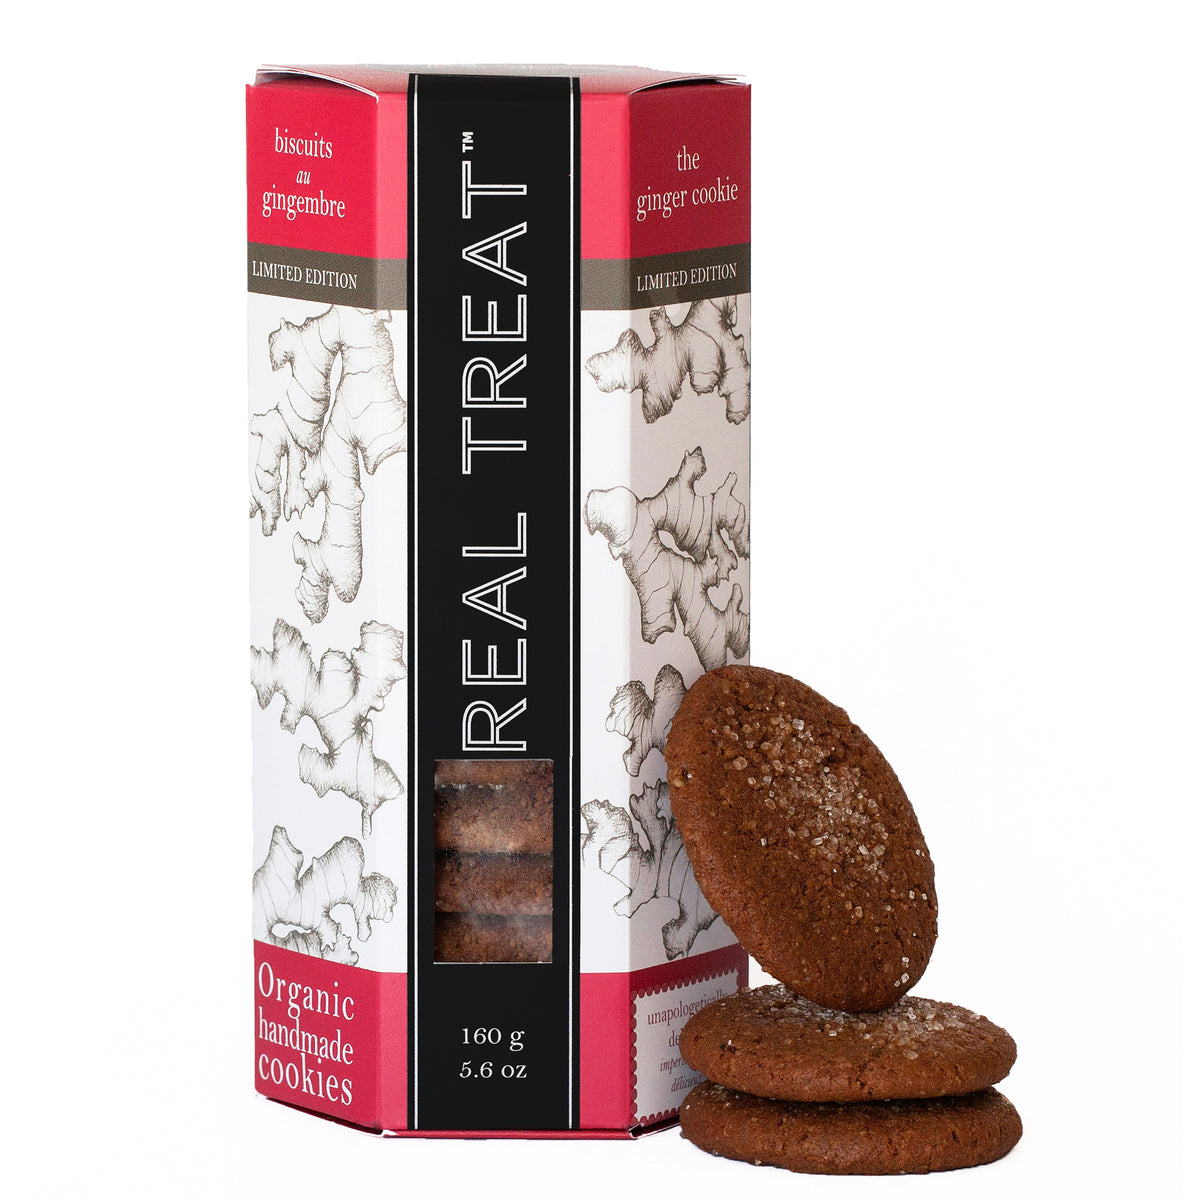 Limited Edition Real Treat Holiday Ginger Cookies in Top Shelf style packaging